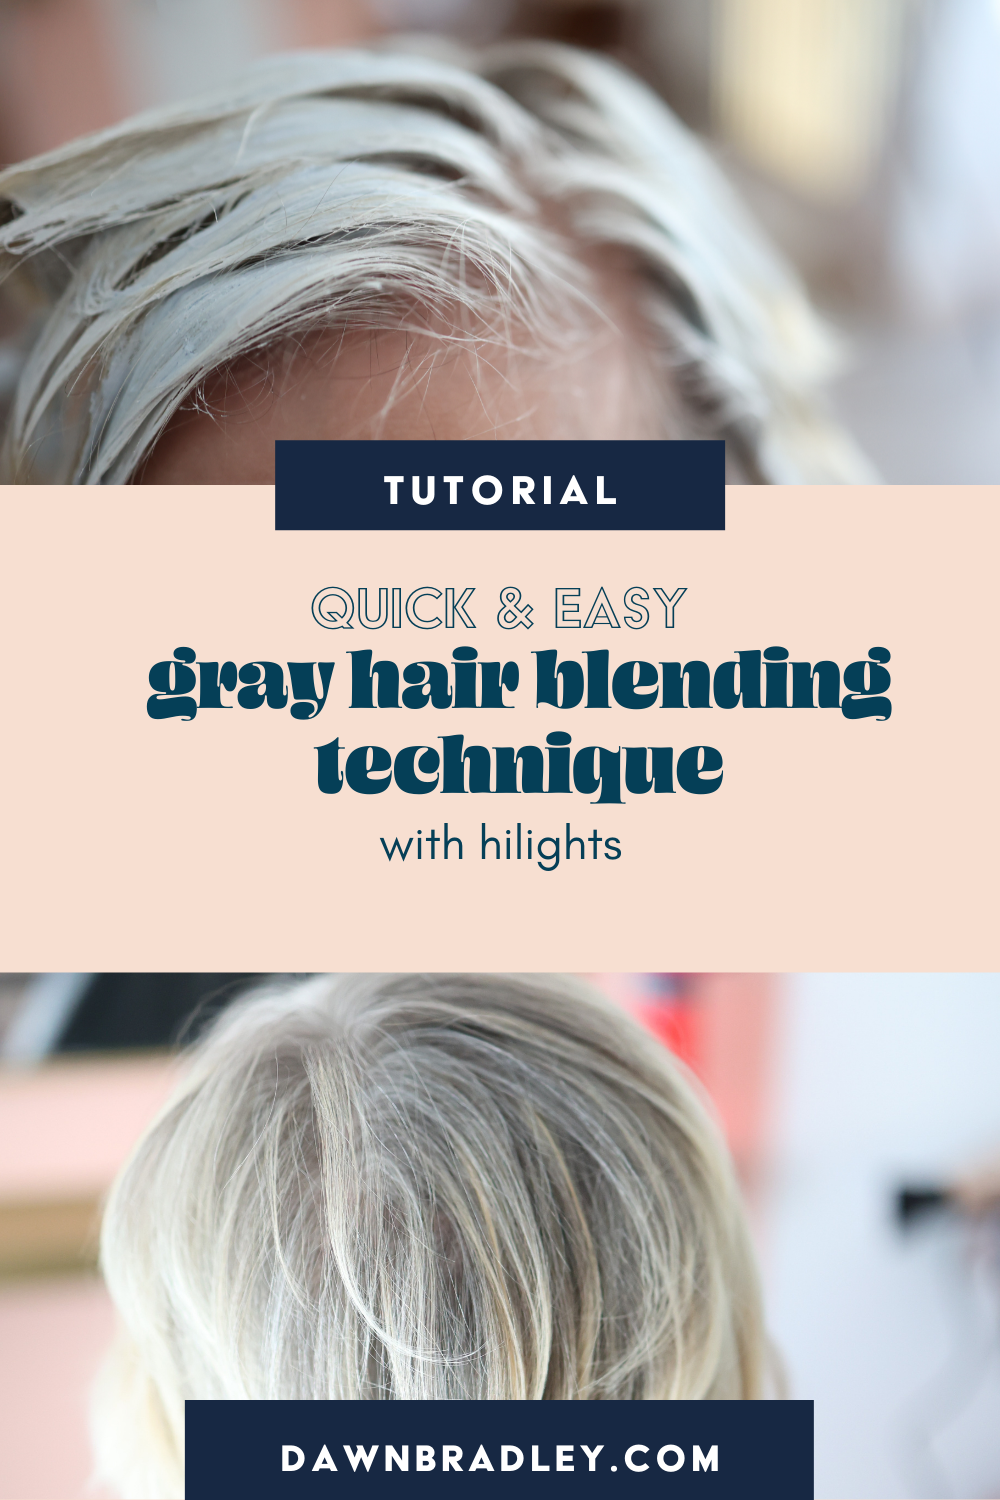 How To Blend Grey Hair With Highlights (The Quick & Easy Way) - Showit Blog